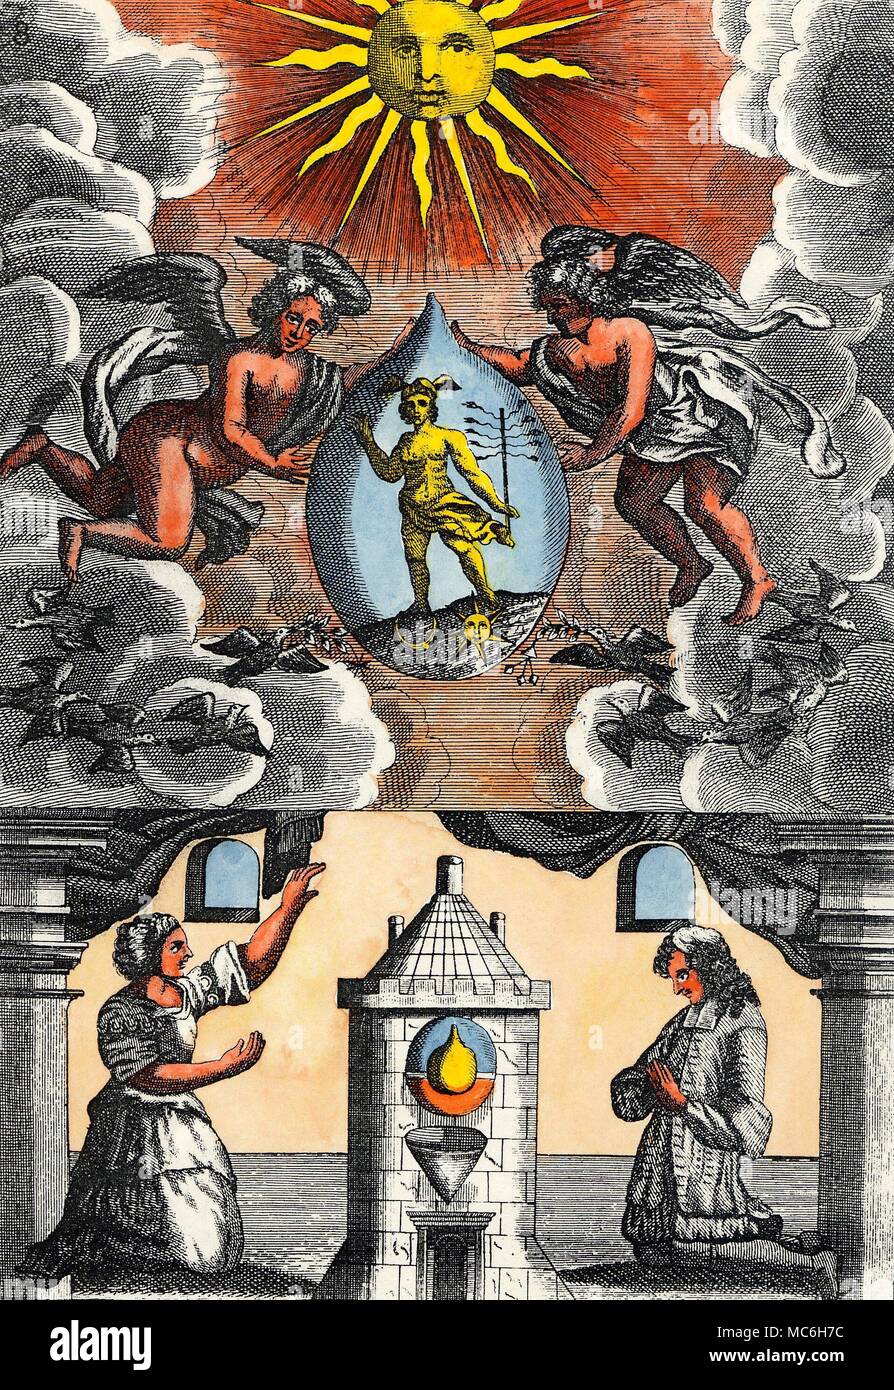 ALCHEMY - MUTUS LIBER, OR SILENT BOOK - PLATE 8. In the eighth plate, the themes seem to change, harking back to the symbolism of plate 2: it may be accidental, but in some printed versions of the Mutus, this plate is represented in mirror image (the figure 8 is not itself visibly changed, but instead of appearing in the top right, it is in the top left. The essential symmetry of the design is not disturbed by this reversal. In this progressed image, Neptune (still in the pendant dew) is transformed into Mercury, standing in triumph over Sun and Moon. An important resolution has been affec Stock Photo